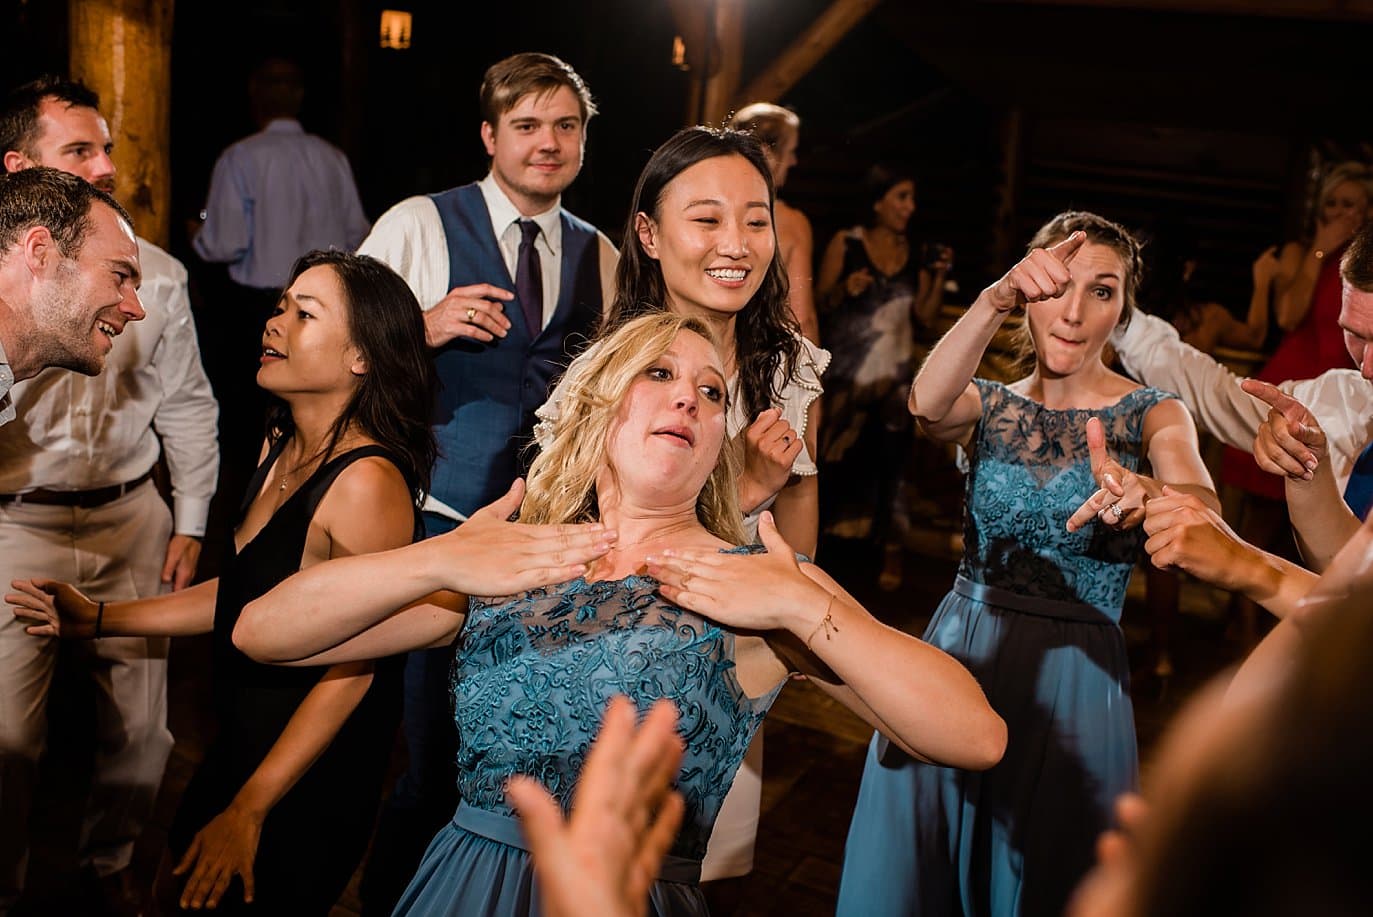 guest and bridal party dancing during wedding reception at Grand Lake Lodge wedding by Grand Lake wedding photographer Jennie Crate Photographer